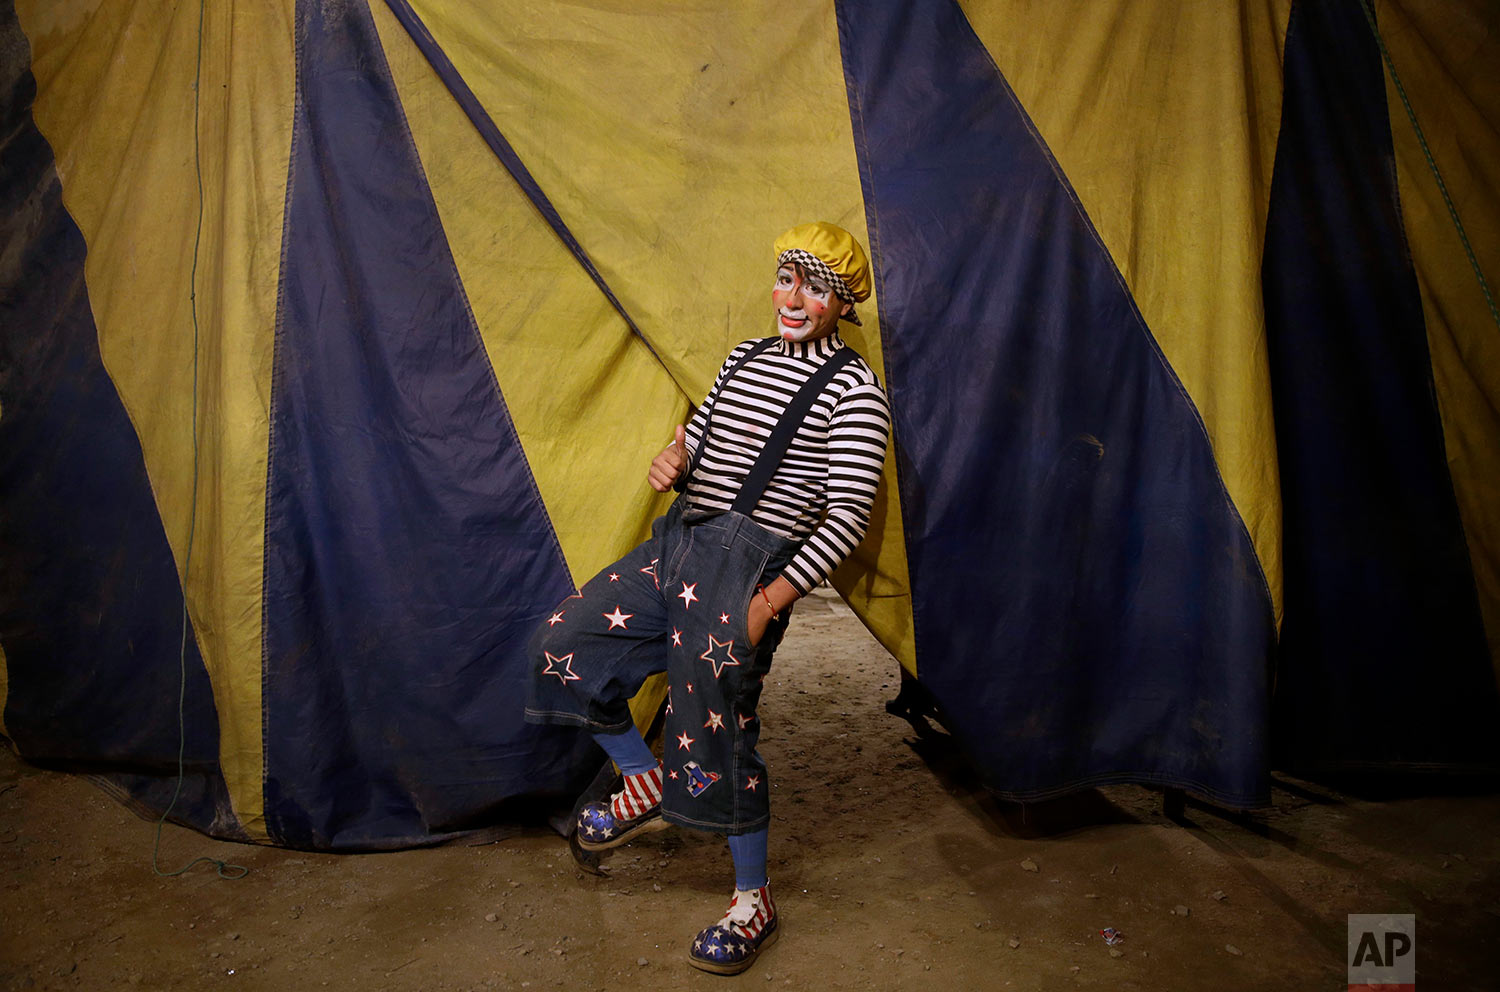  Santiago Astopilco, dressed as his clown personality "Vaguito" poses for a portrait behind the Tony Perejil circus tent set up in the shantytown of Puente Piedra, before the start of the show on the outskirts of Lima, Peru, July 8, 2018. (AP Photo/M